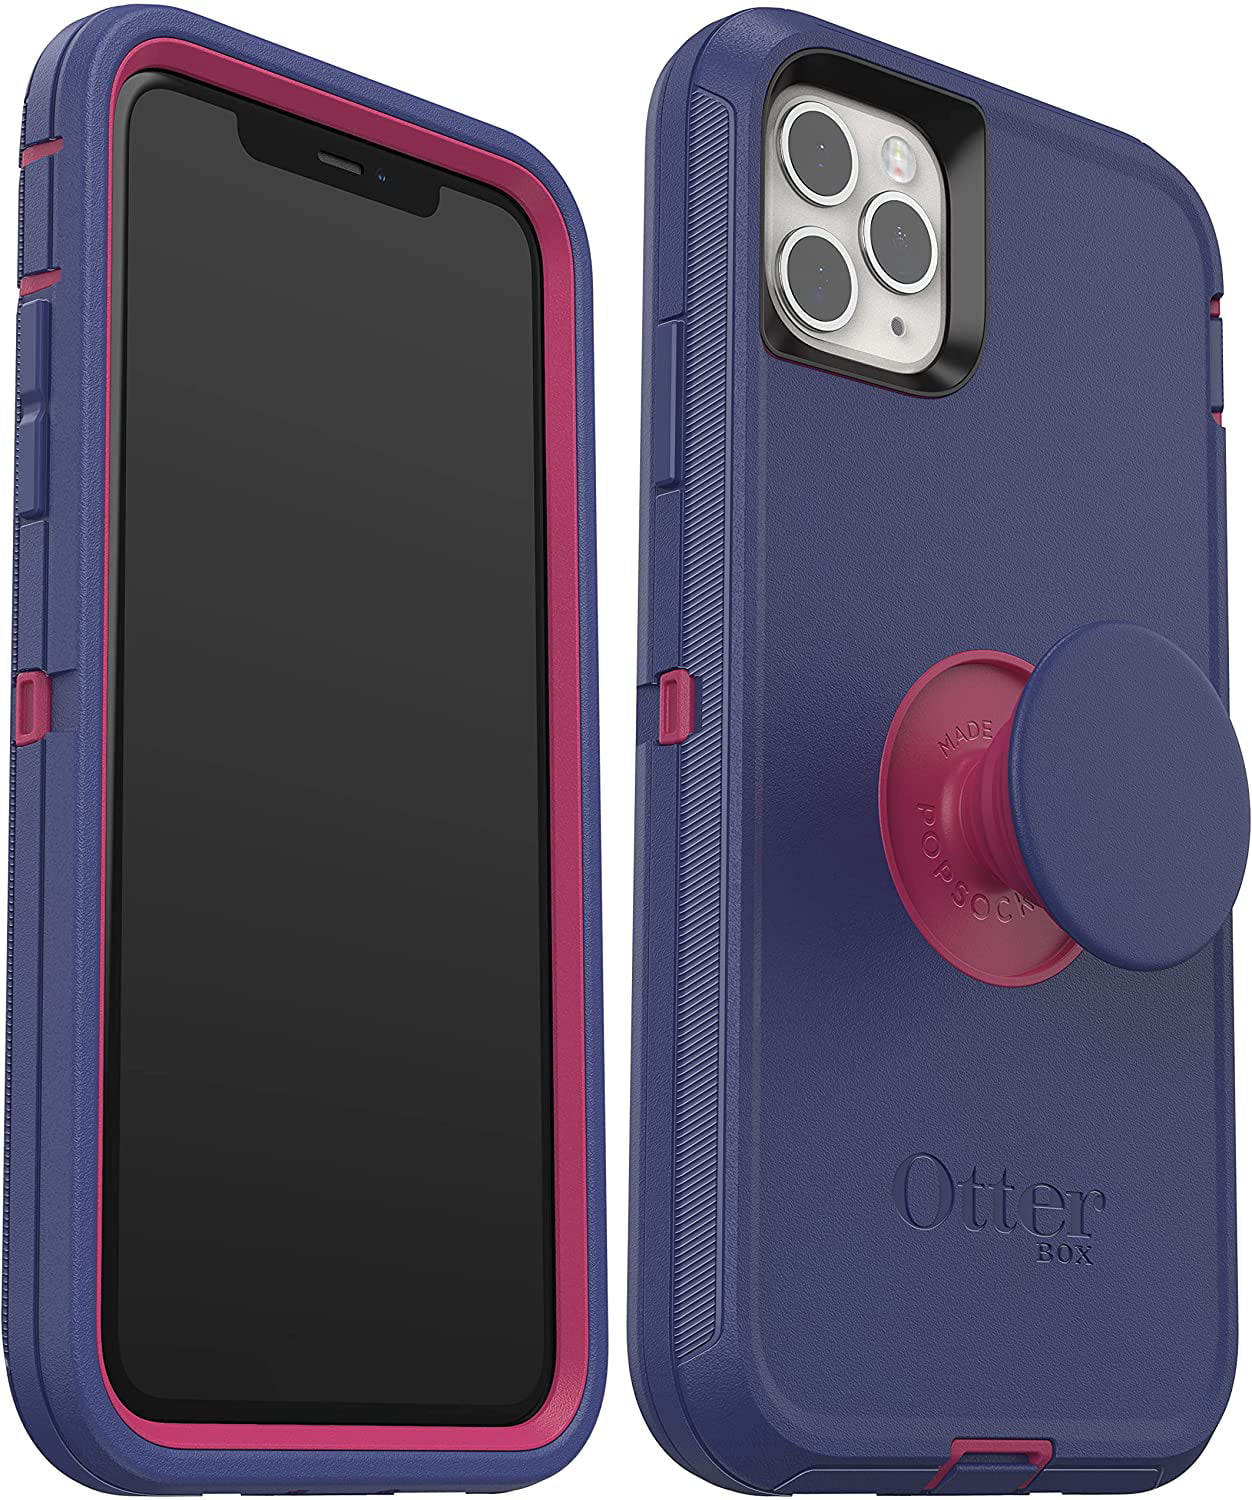 OtterBox + Pop Defender Series Case for iPhone 11 Pro Max, Grape Jelly